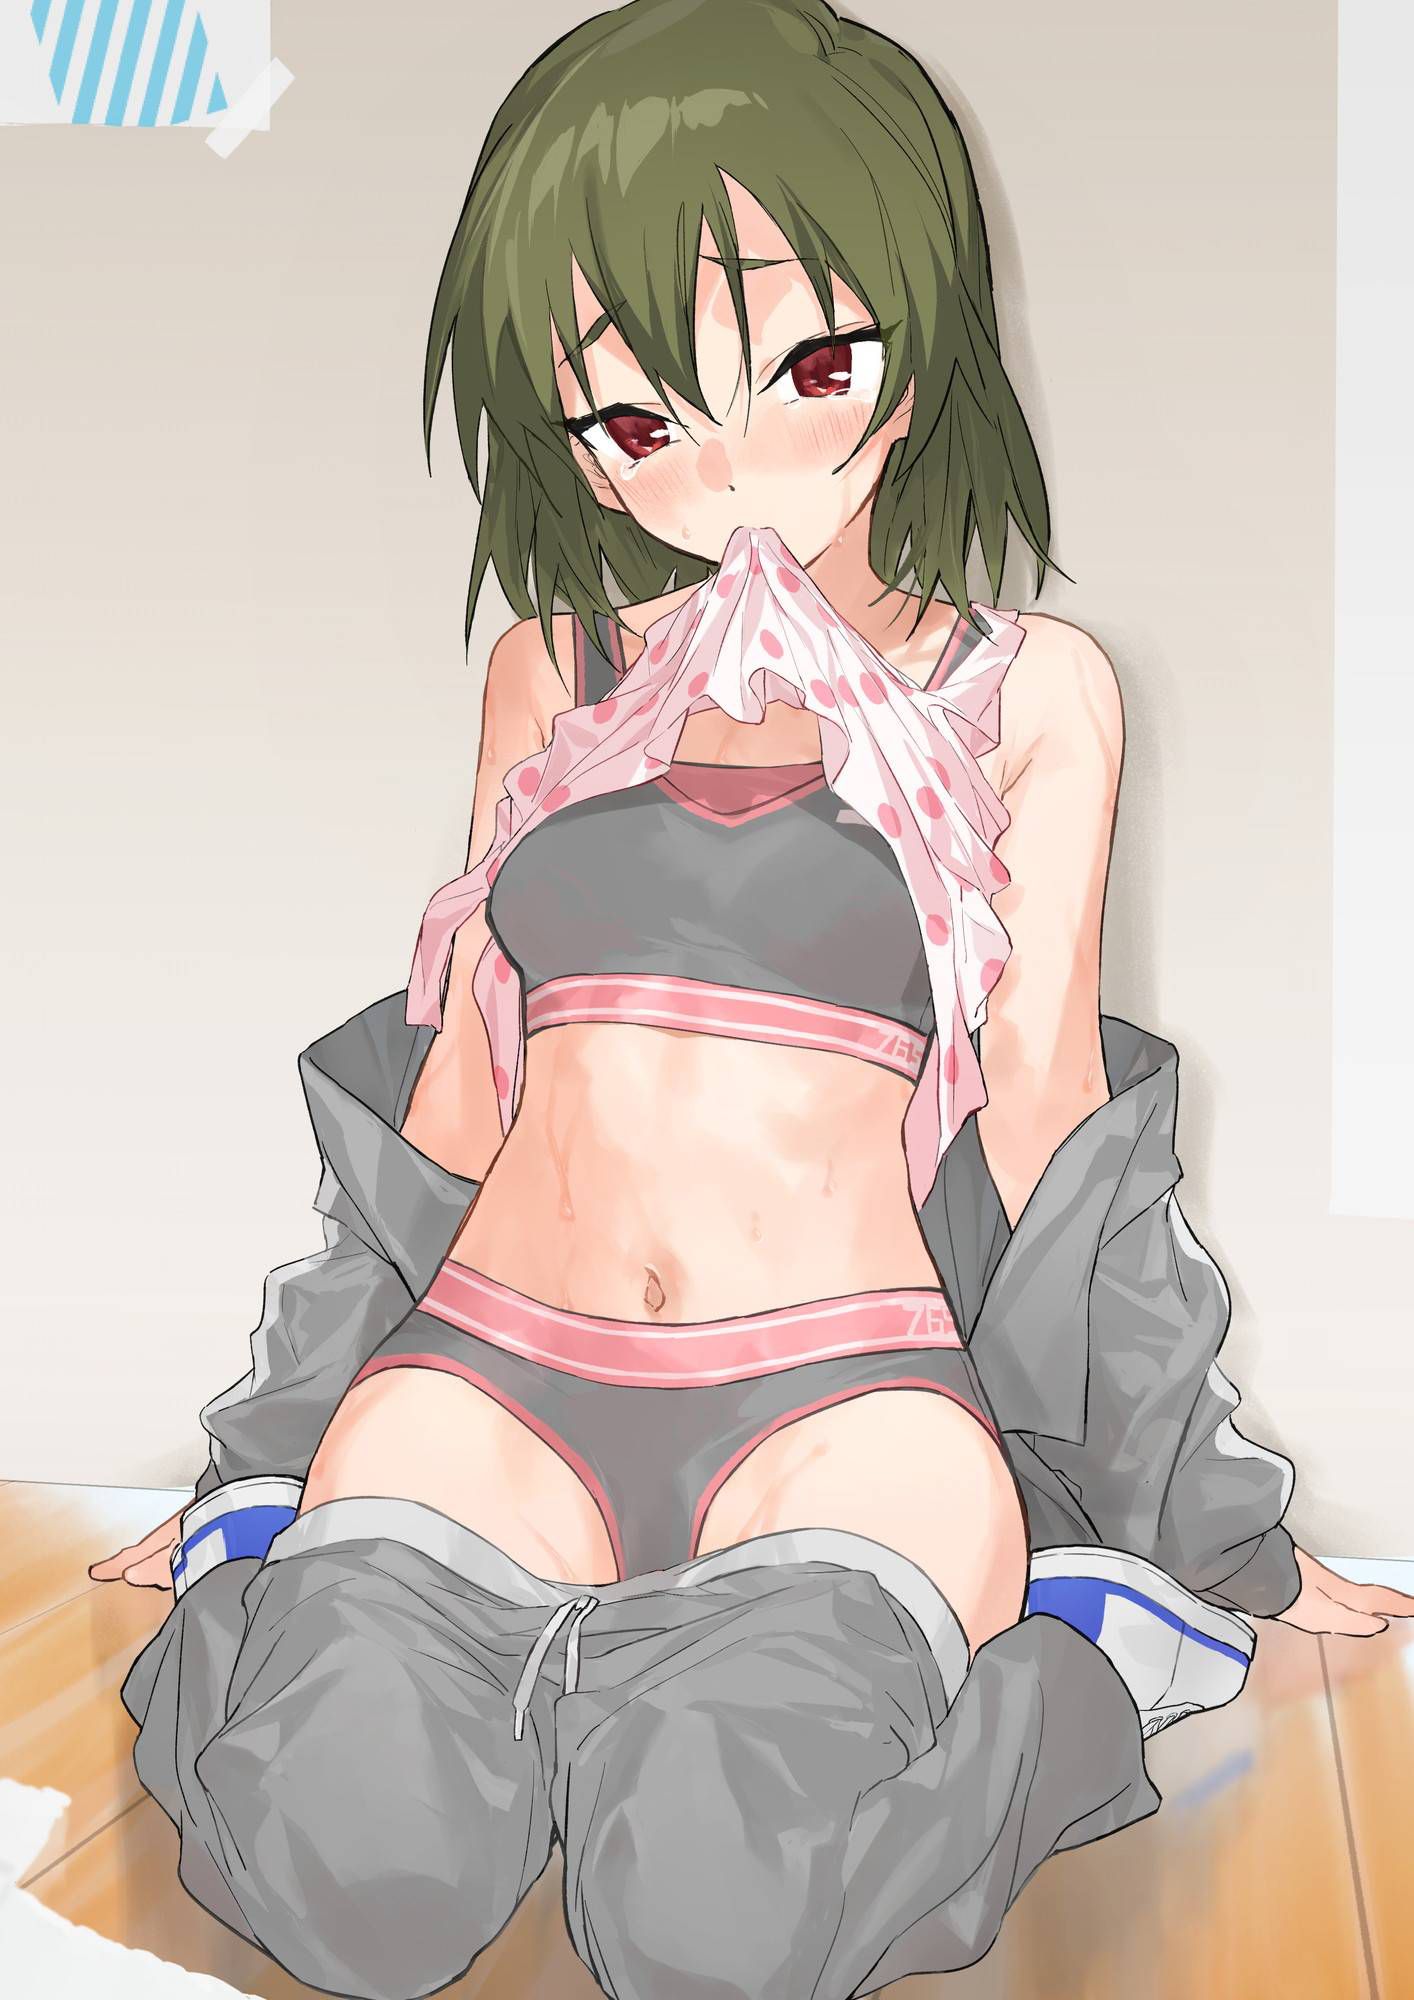 I want to pull it out with the erotic image of spats, so I will stick it 20